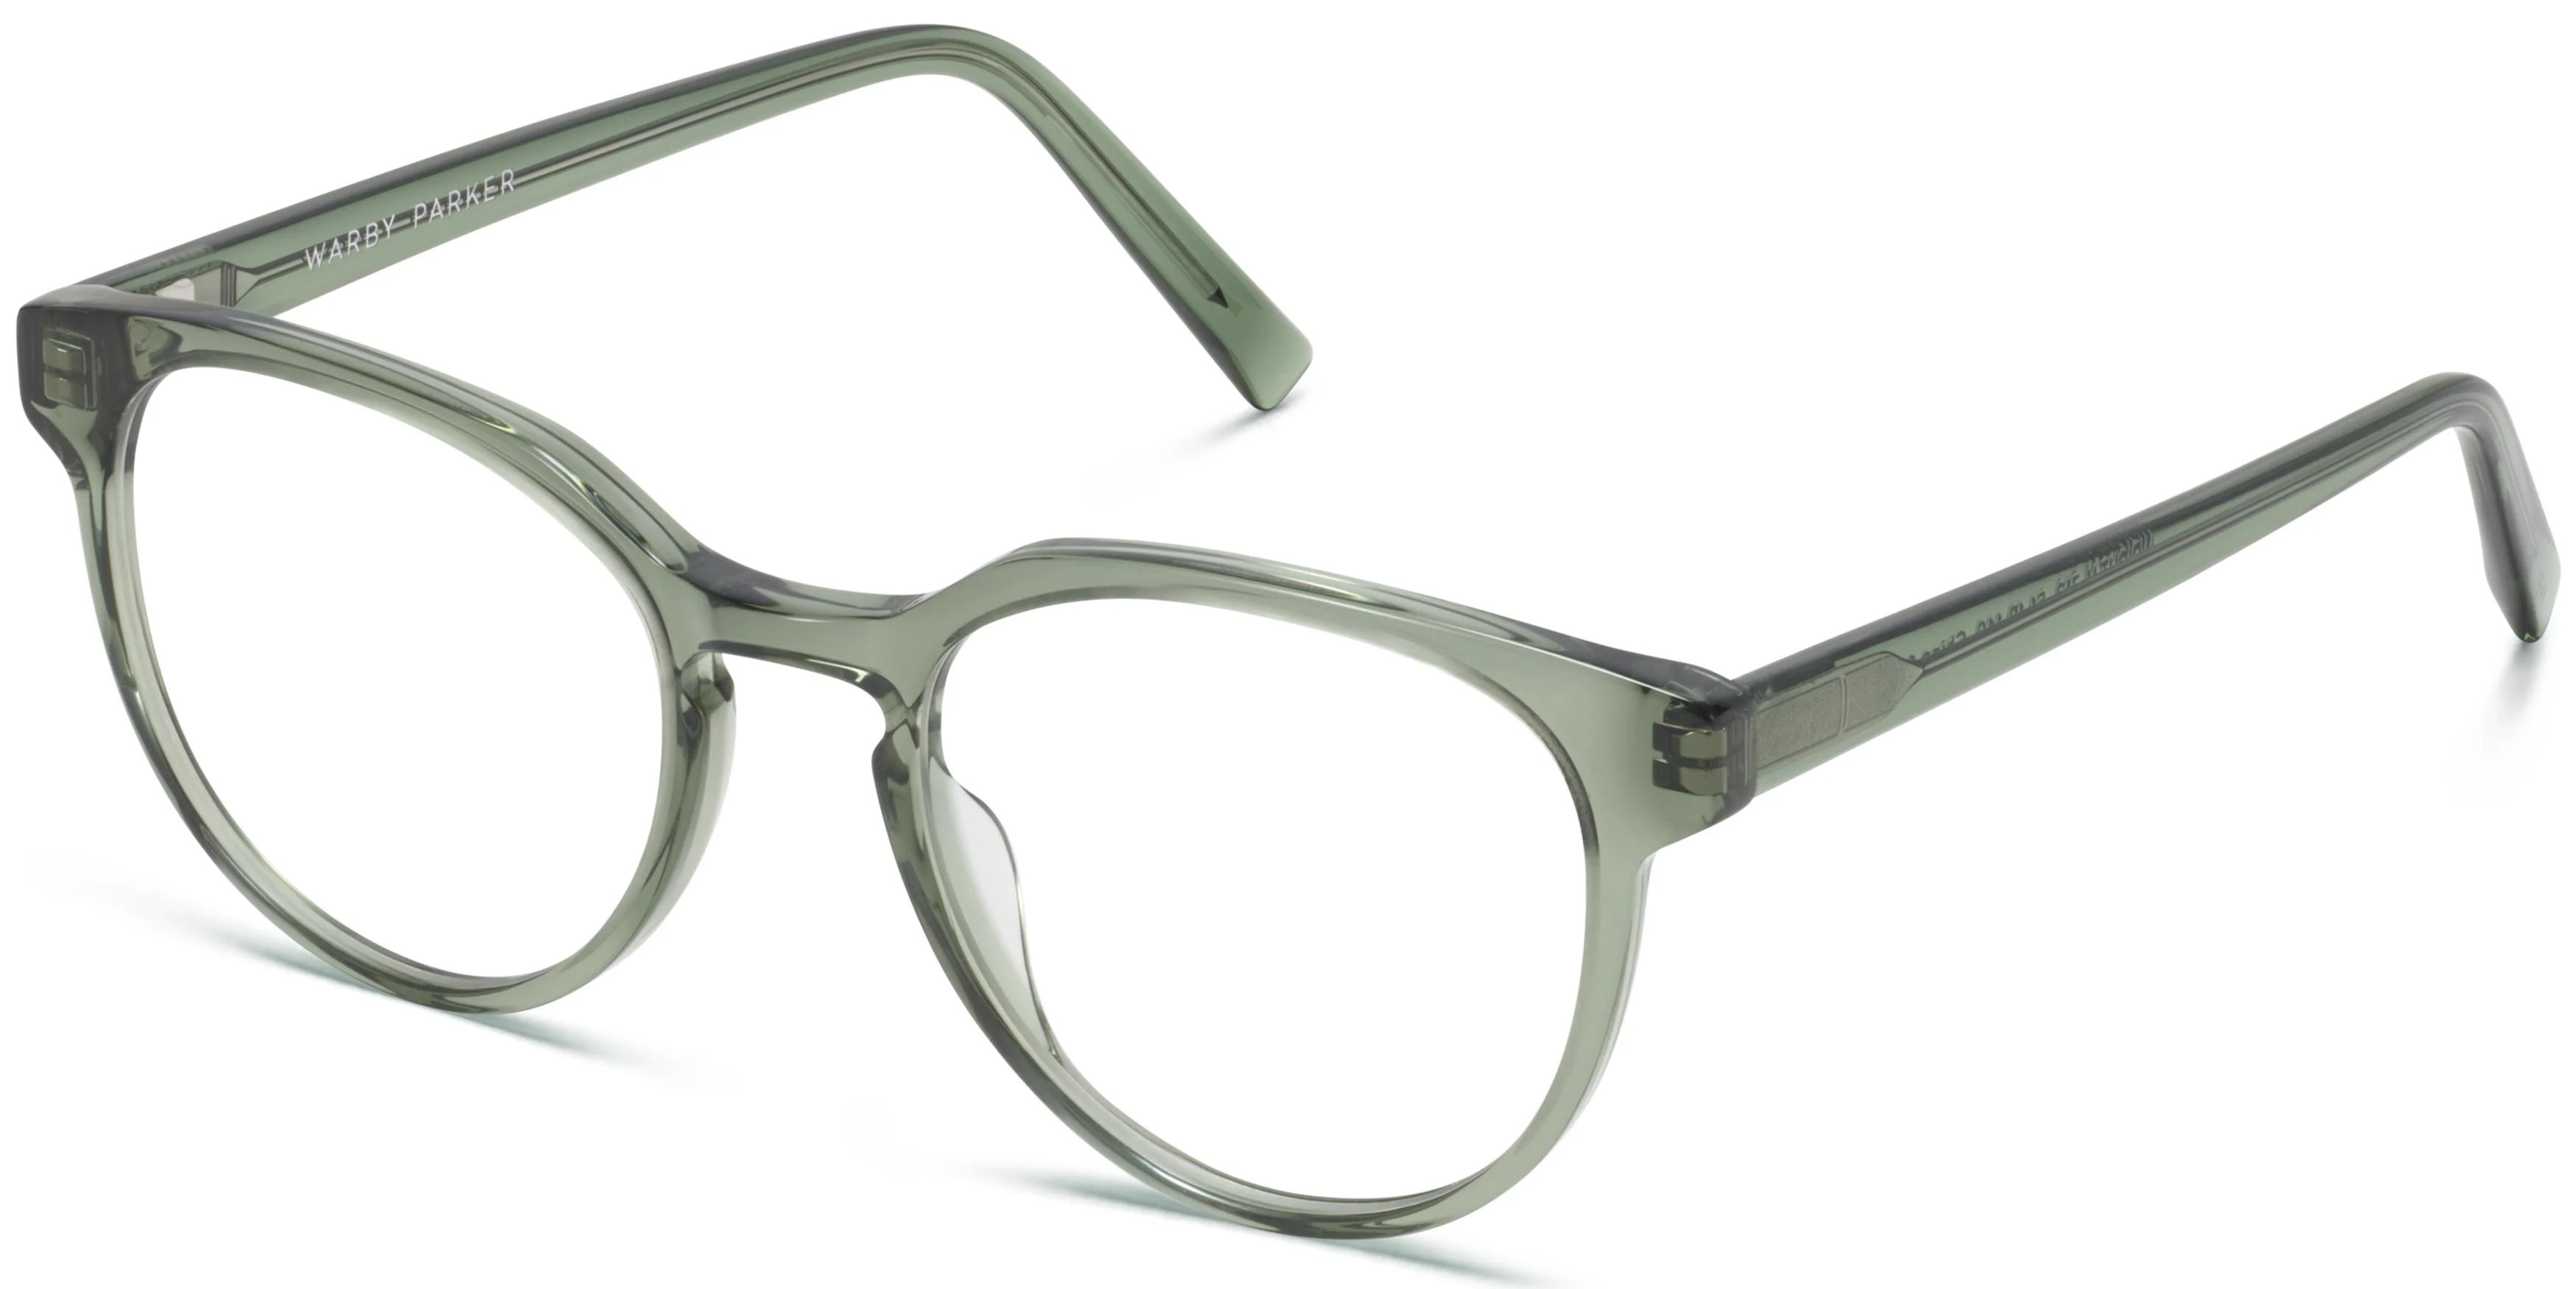 Wright Eyeglasses in Rosemary Crystal | Warby Parker | Warby Parker (US)